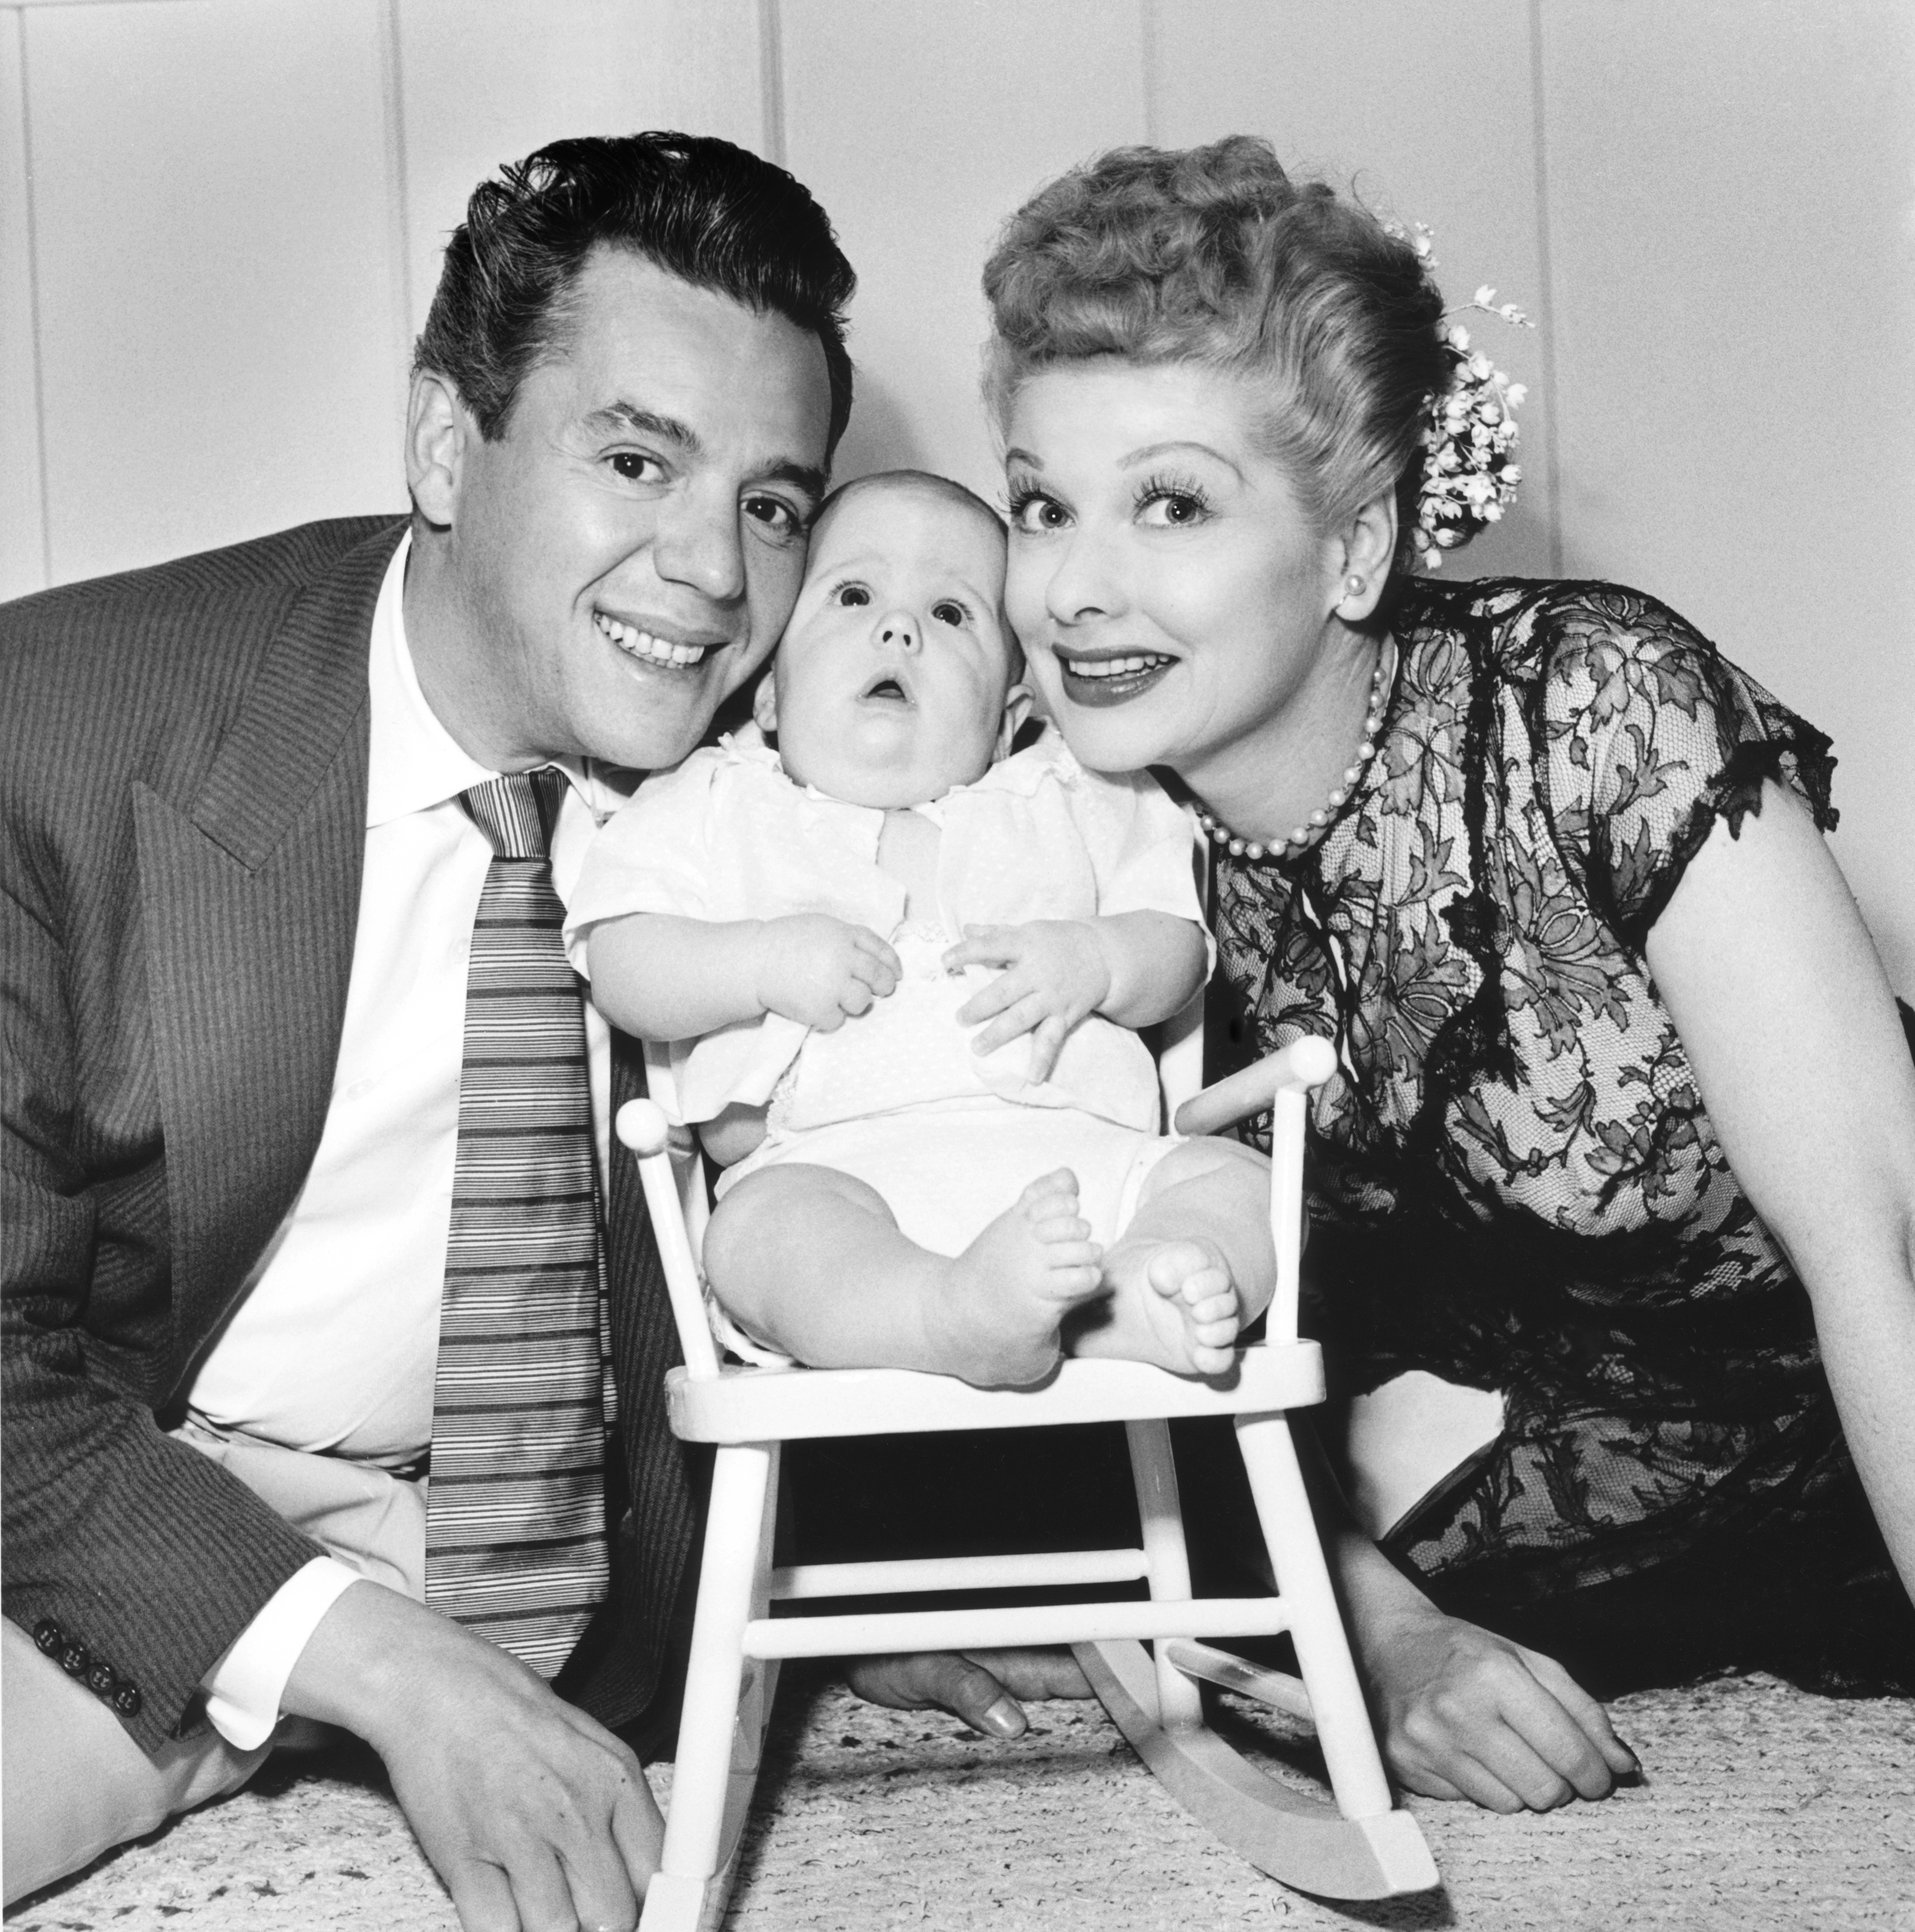 Lucille Ball, Desi Arnaz, and Desi Arnaz Jr. at their home in California in January 1953 | Source: Getty Images